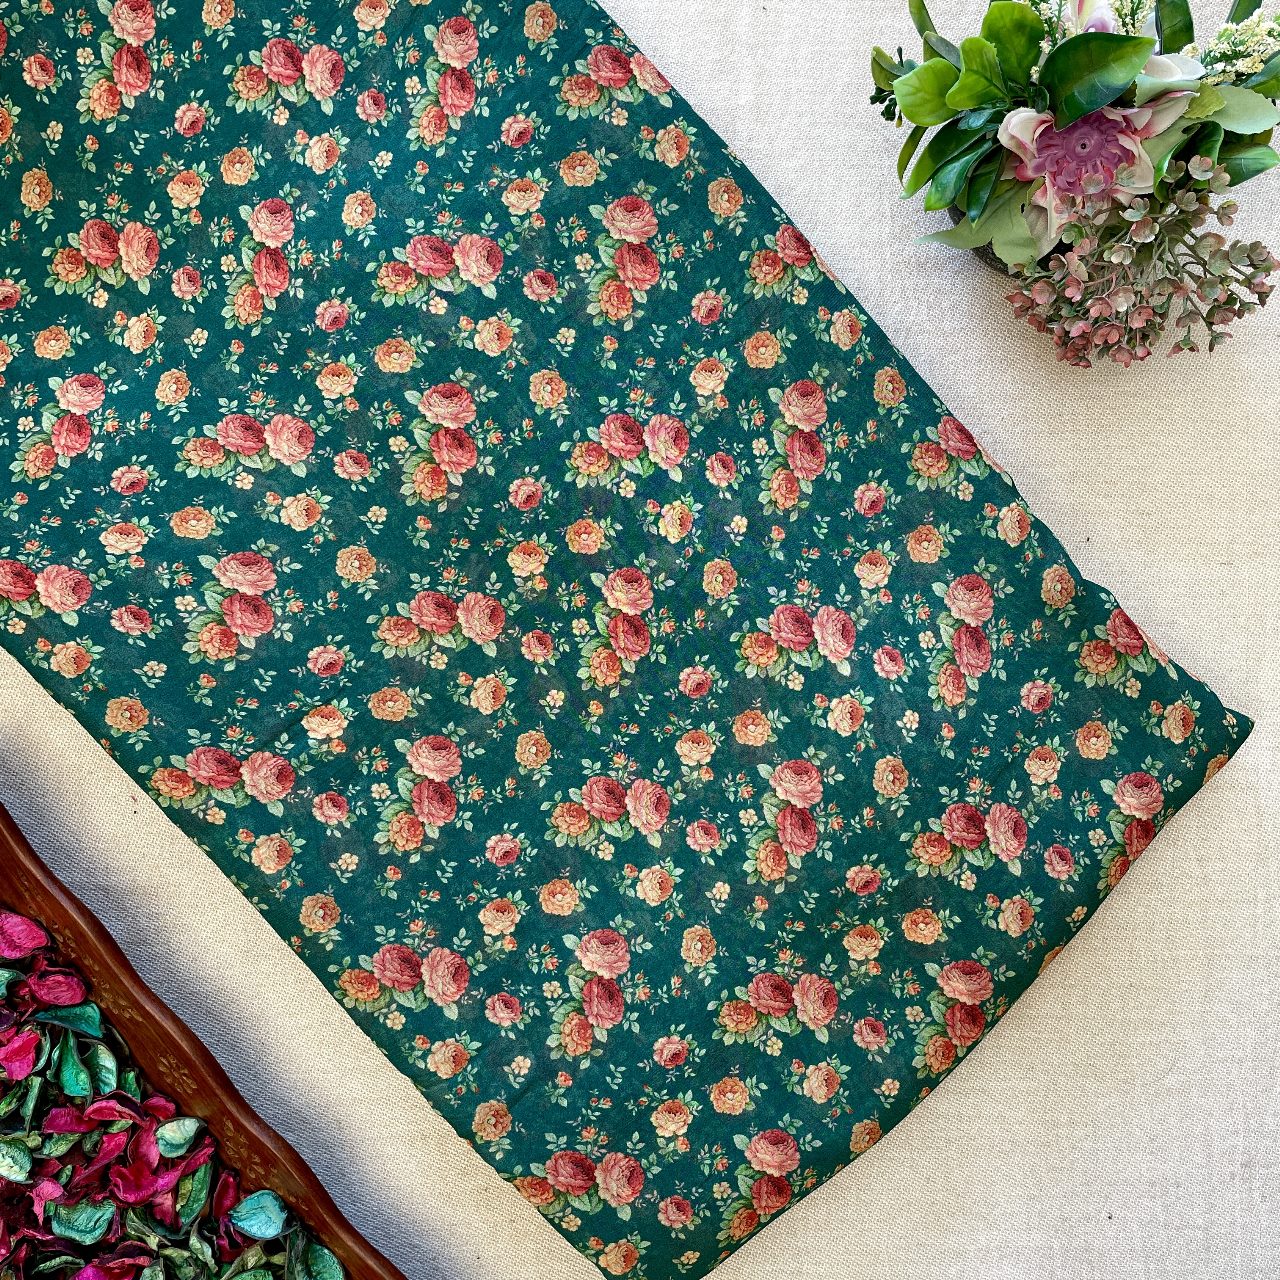 Pure Georgette Printed Fabric - Green - Floral